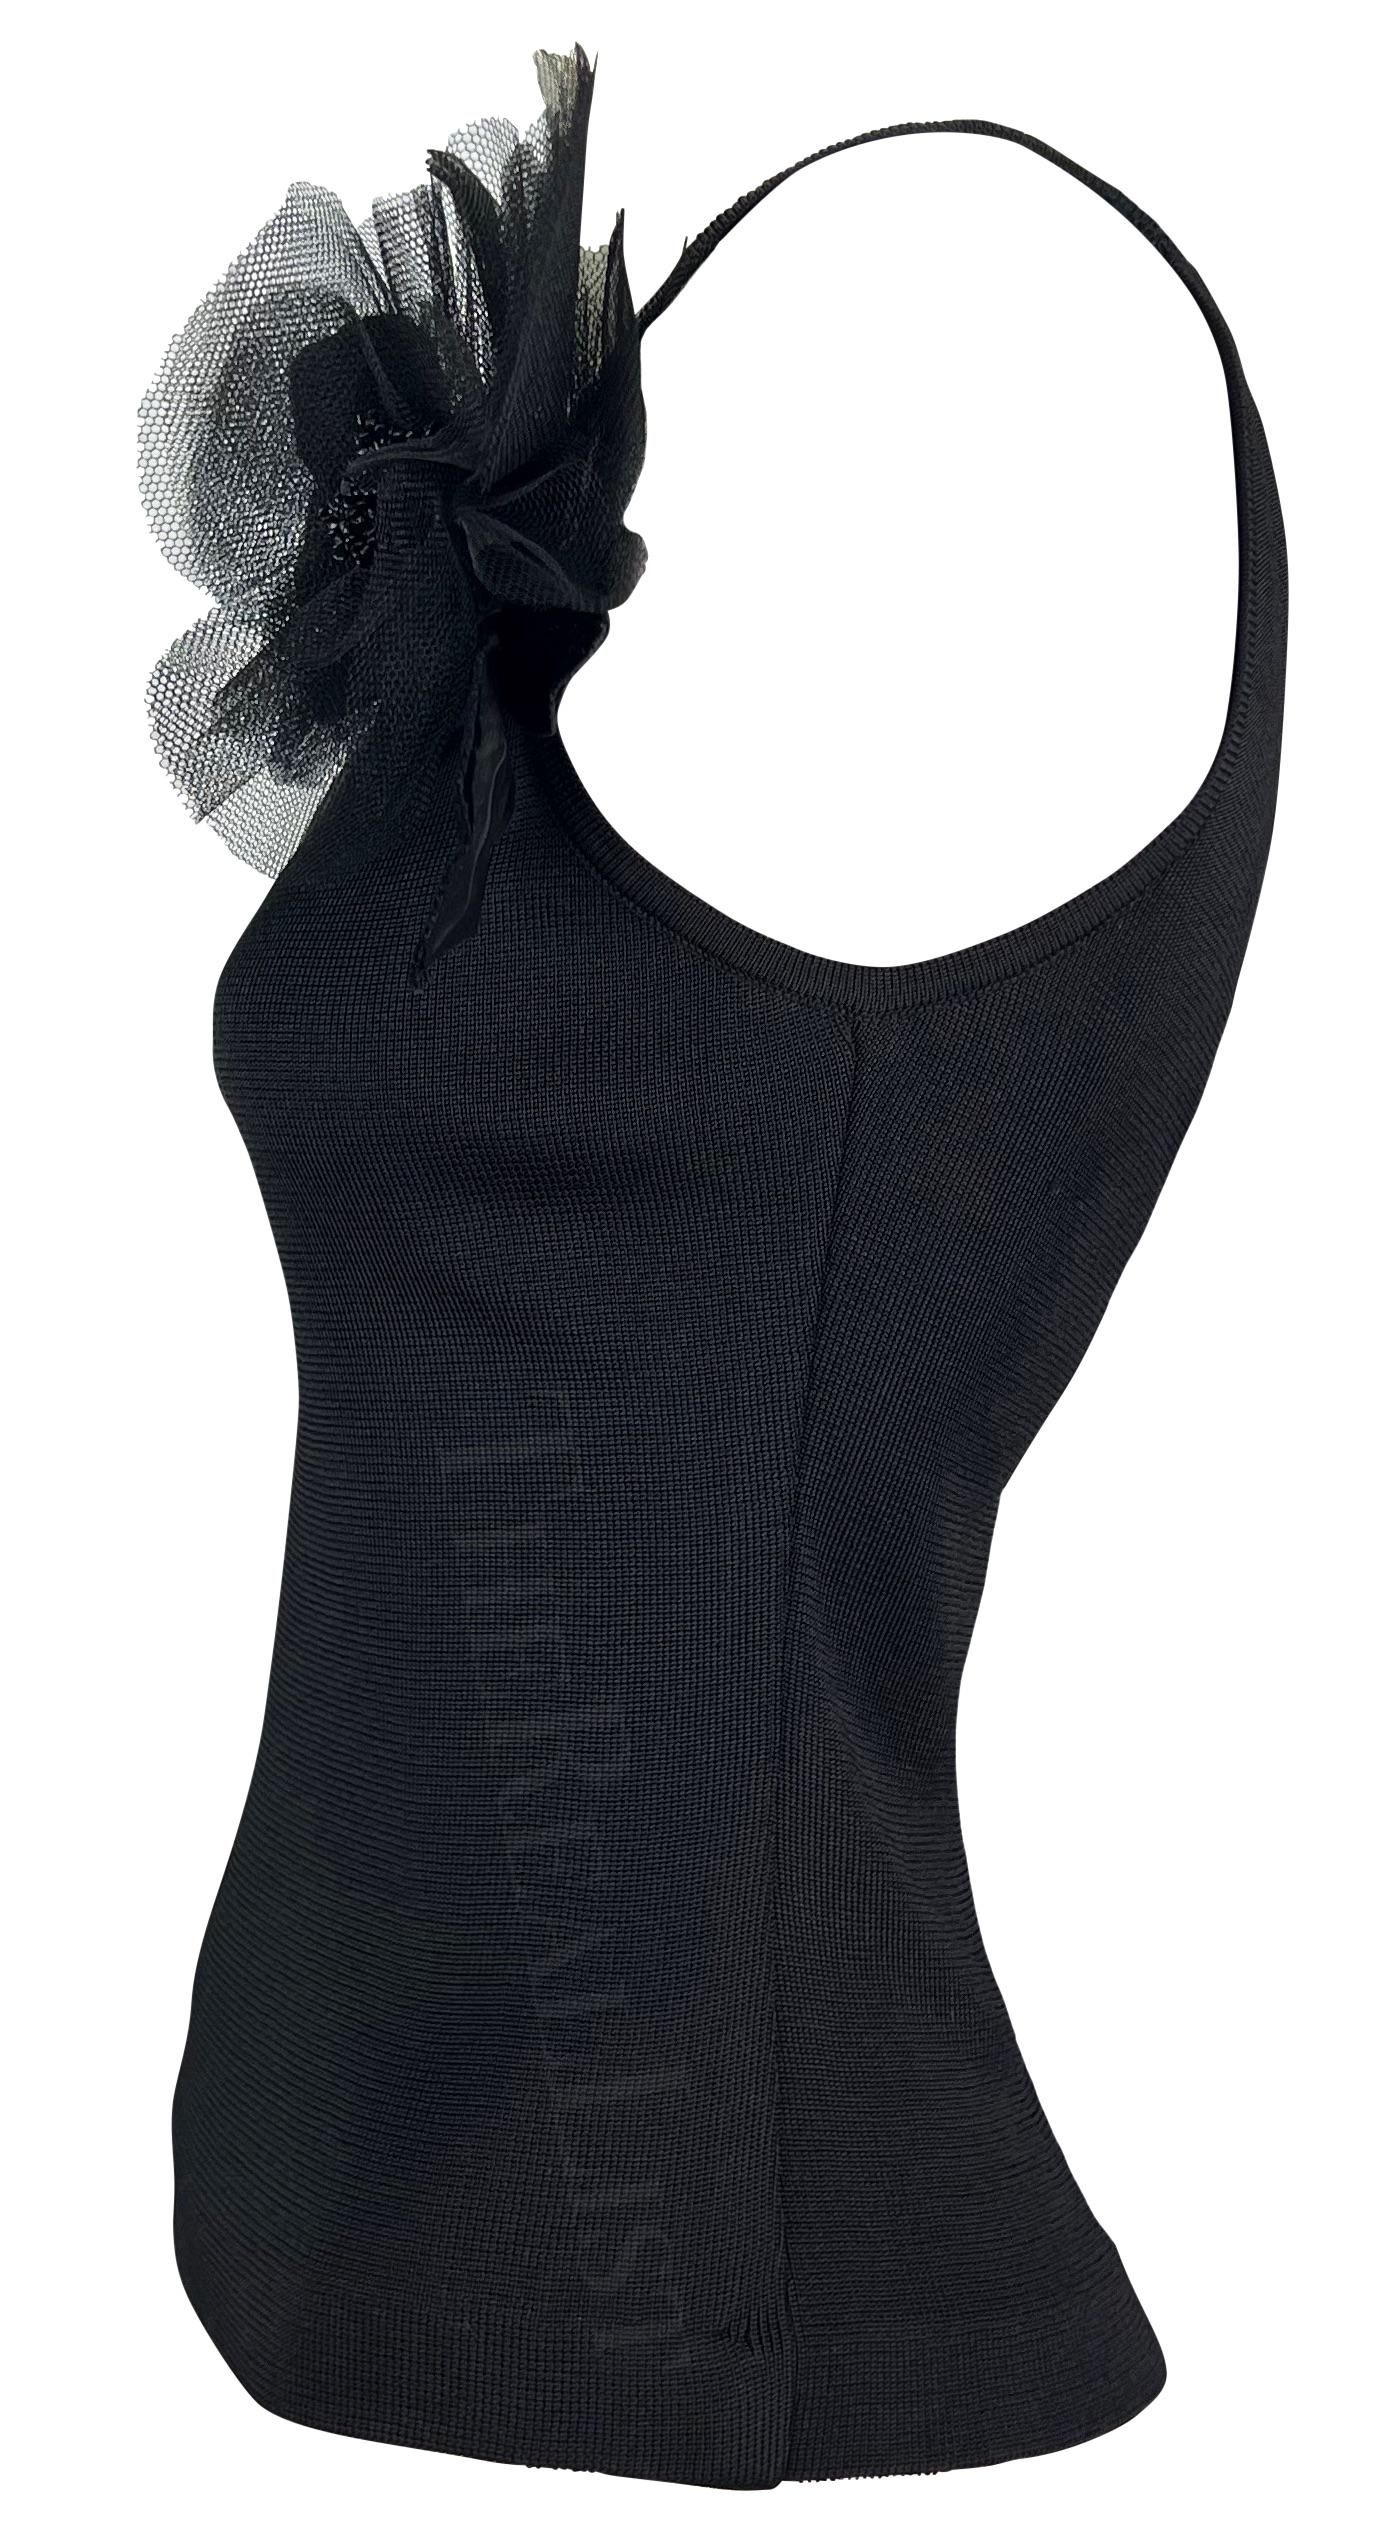 1990s Yves Saint Laurent Black Knit Floral Applique Tank Top In Excellent Condition For Sale In West Hollywood, CA